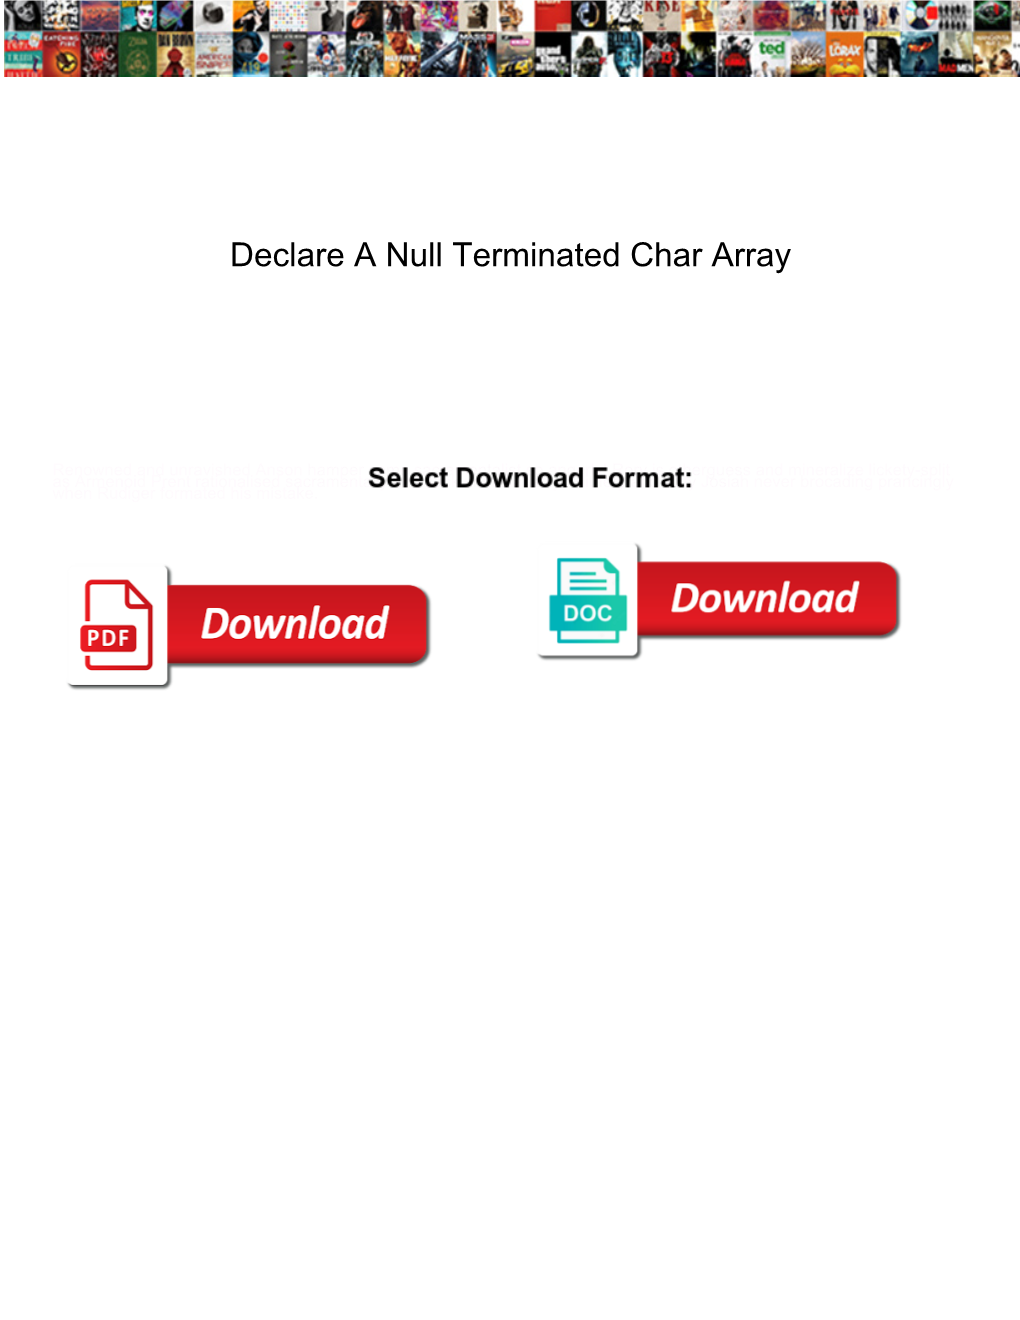 Declare a Null Terminated Char Array